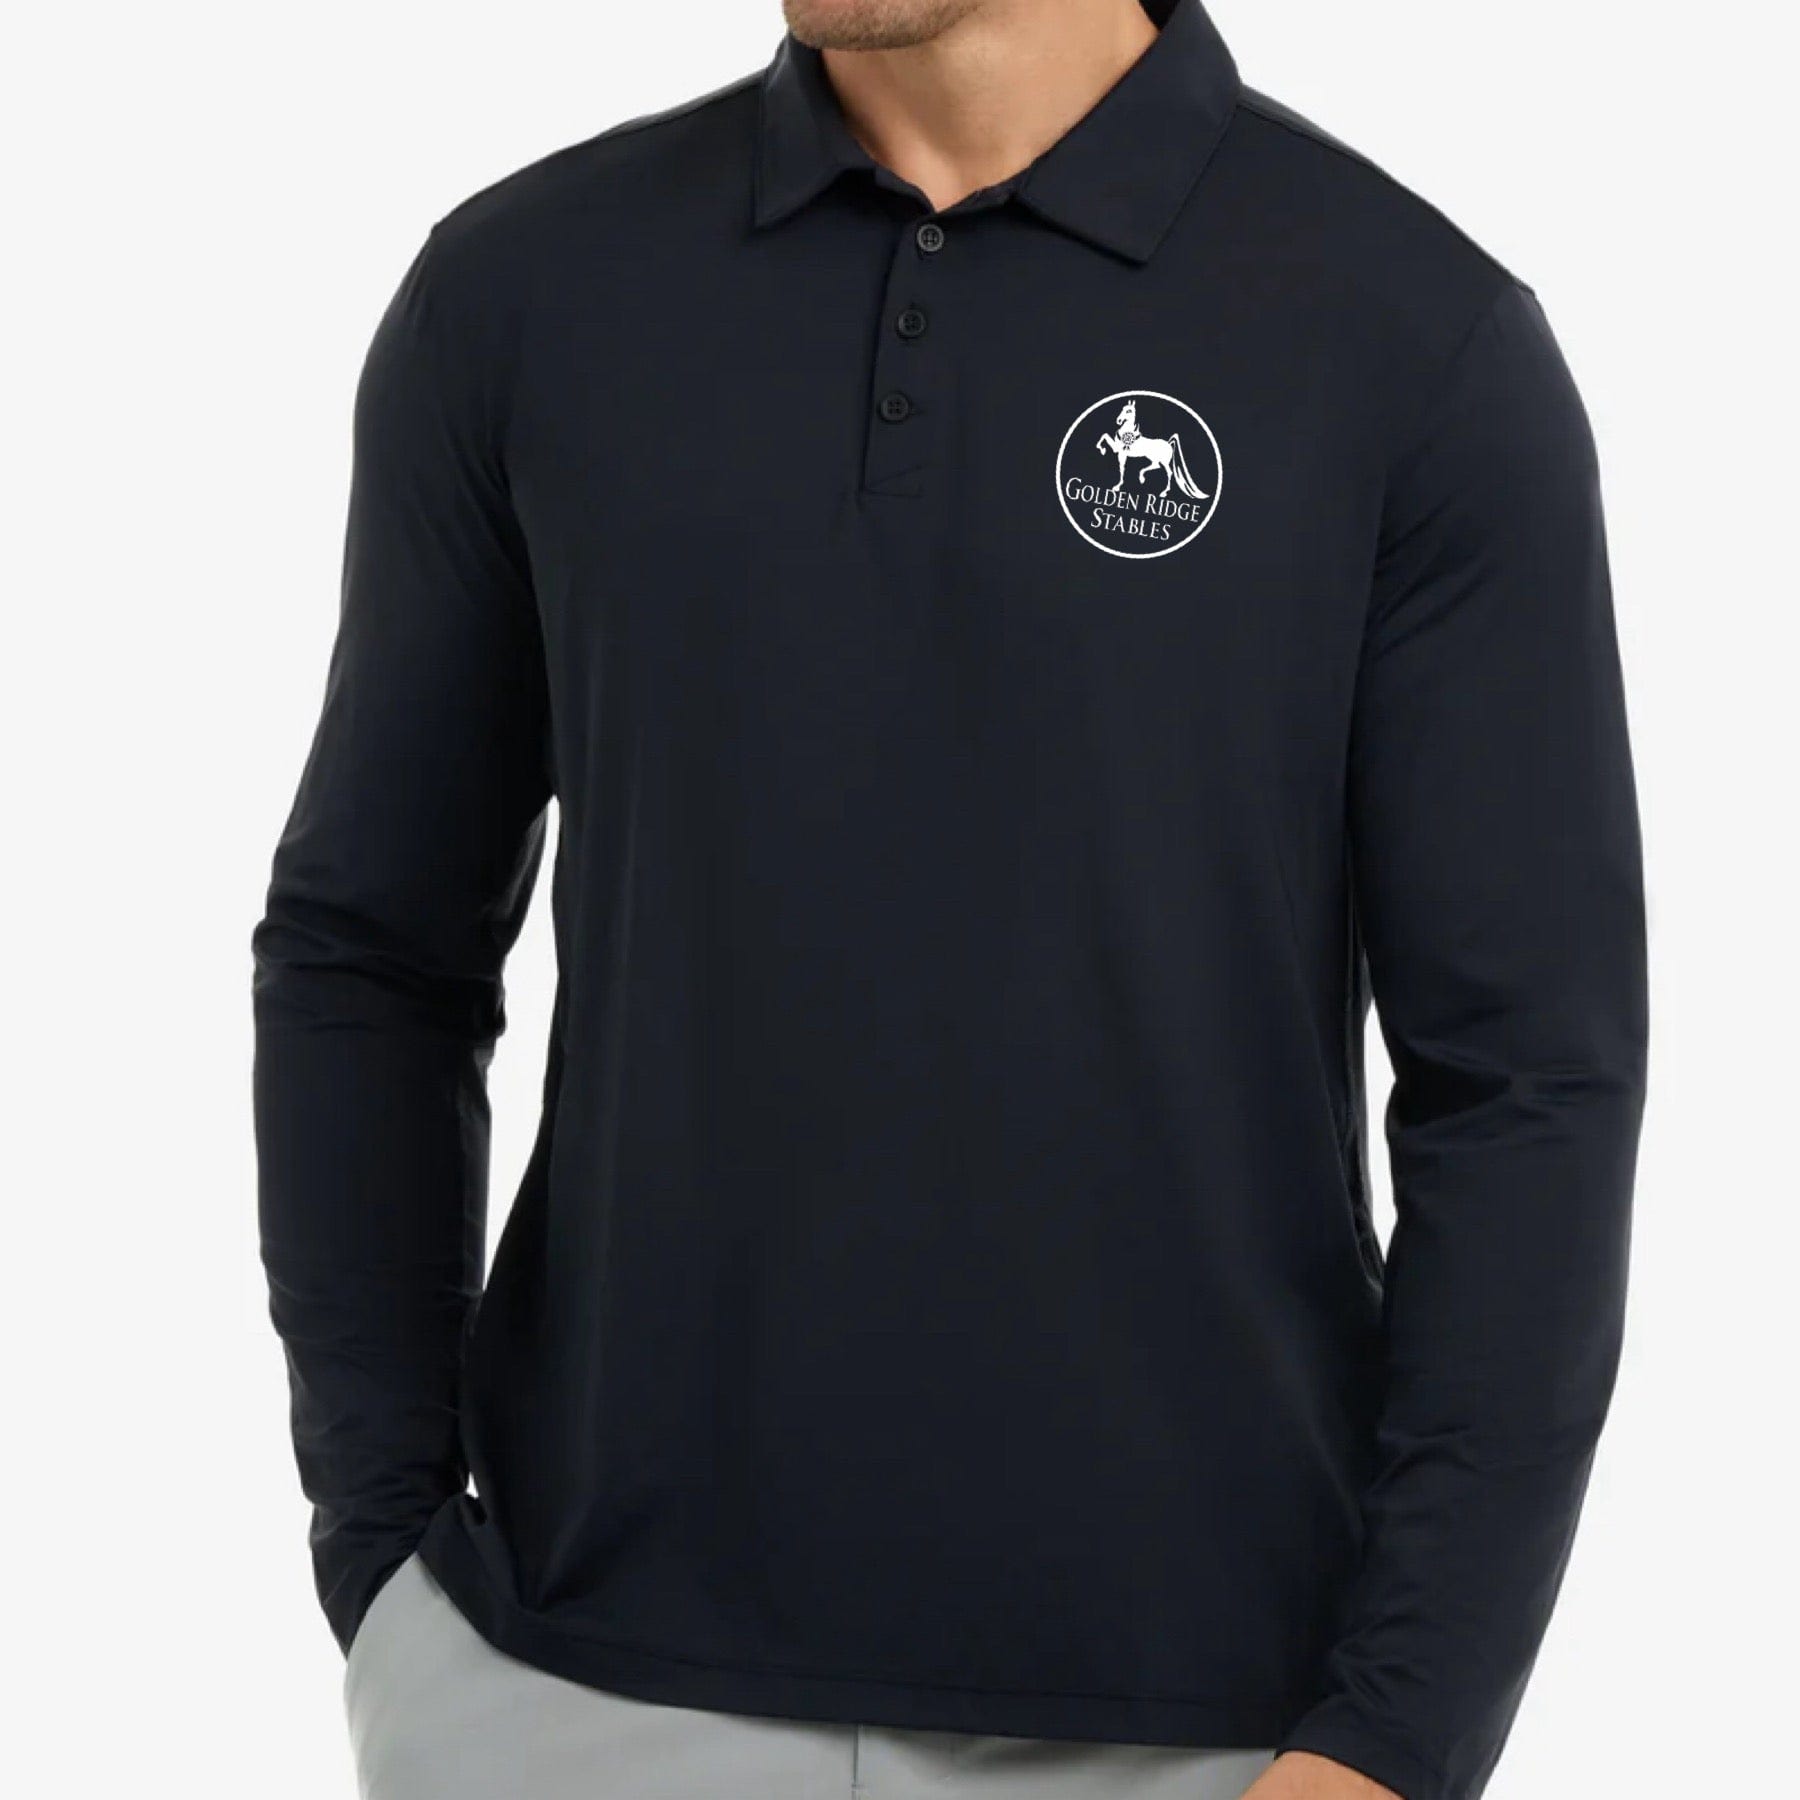 Equestrian Team Apparel Golden Ridge Stables Men's Sun Shirt equestrian team apparel online tack store mobile tack store custom farm apparel custom show stable clothing equestrian lifestyle horse show clothing riding clothes horses equestrian tack store